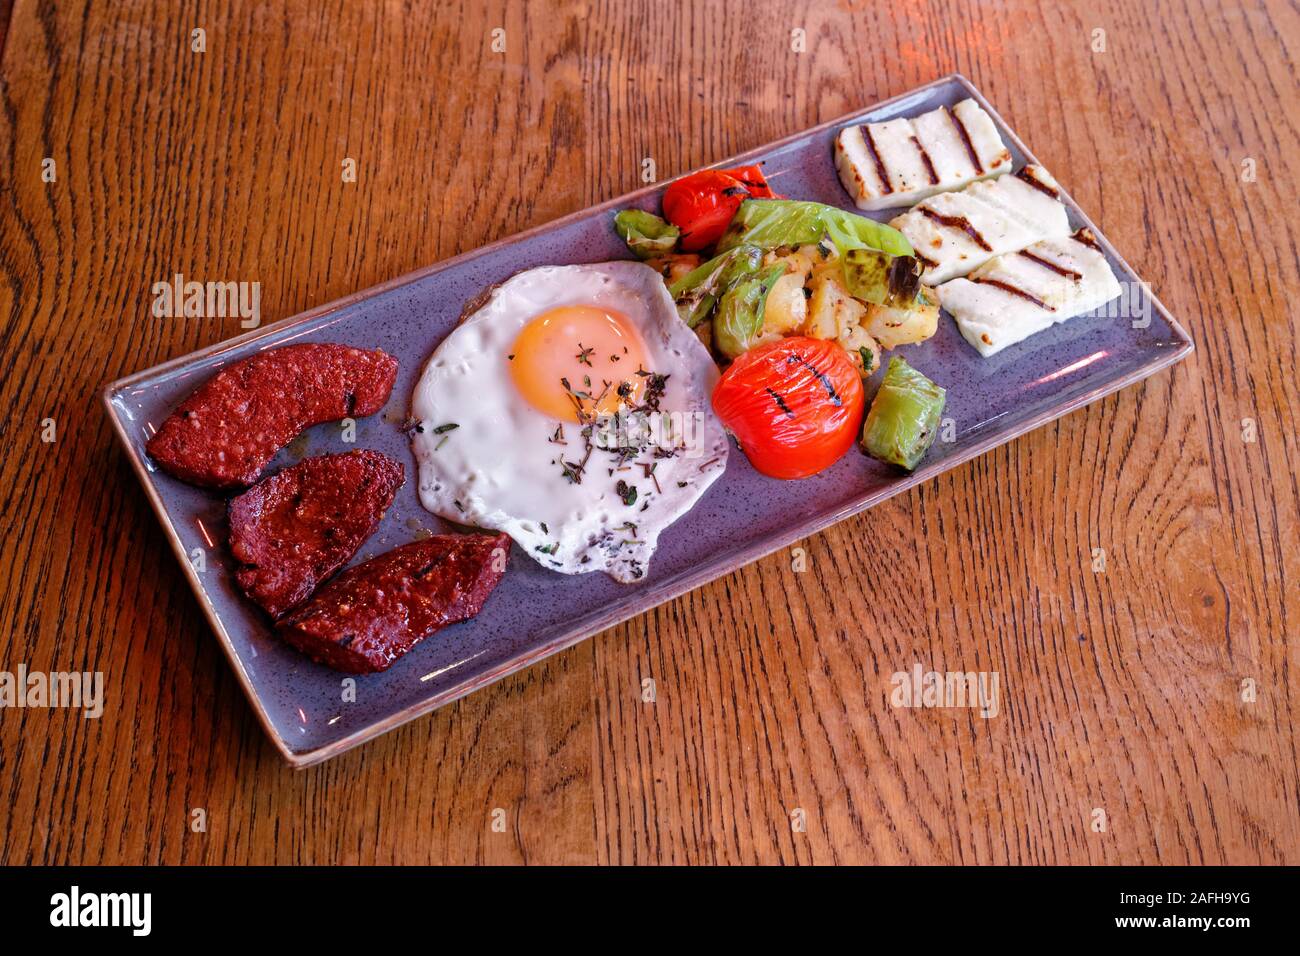 Turkish roasted breakfast plate with fermented bologna sausage (sudjuk), grilled egg, hallouim (hellim) cheese, boiled potatoe, green pepper, tomato. Stock Photo